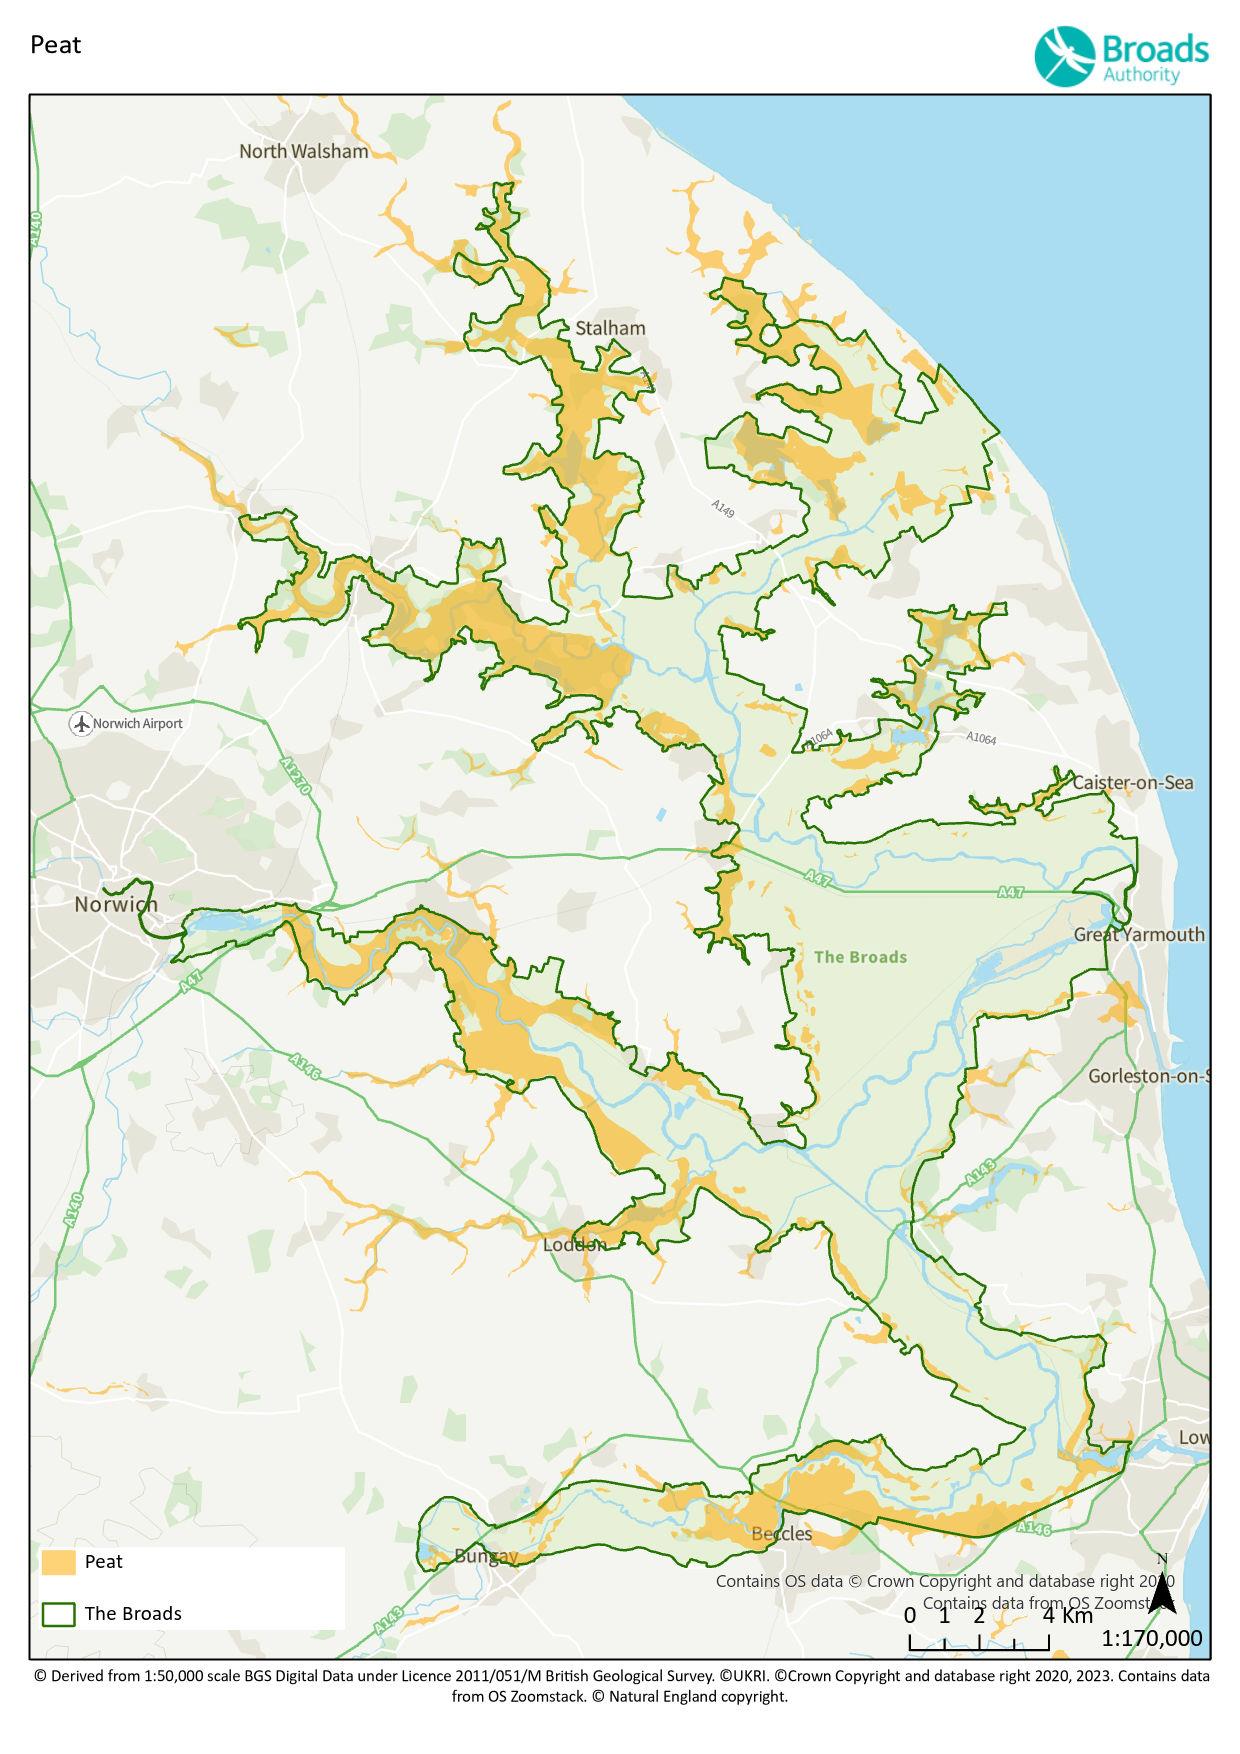 Map showing the location of peat in the Broads